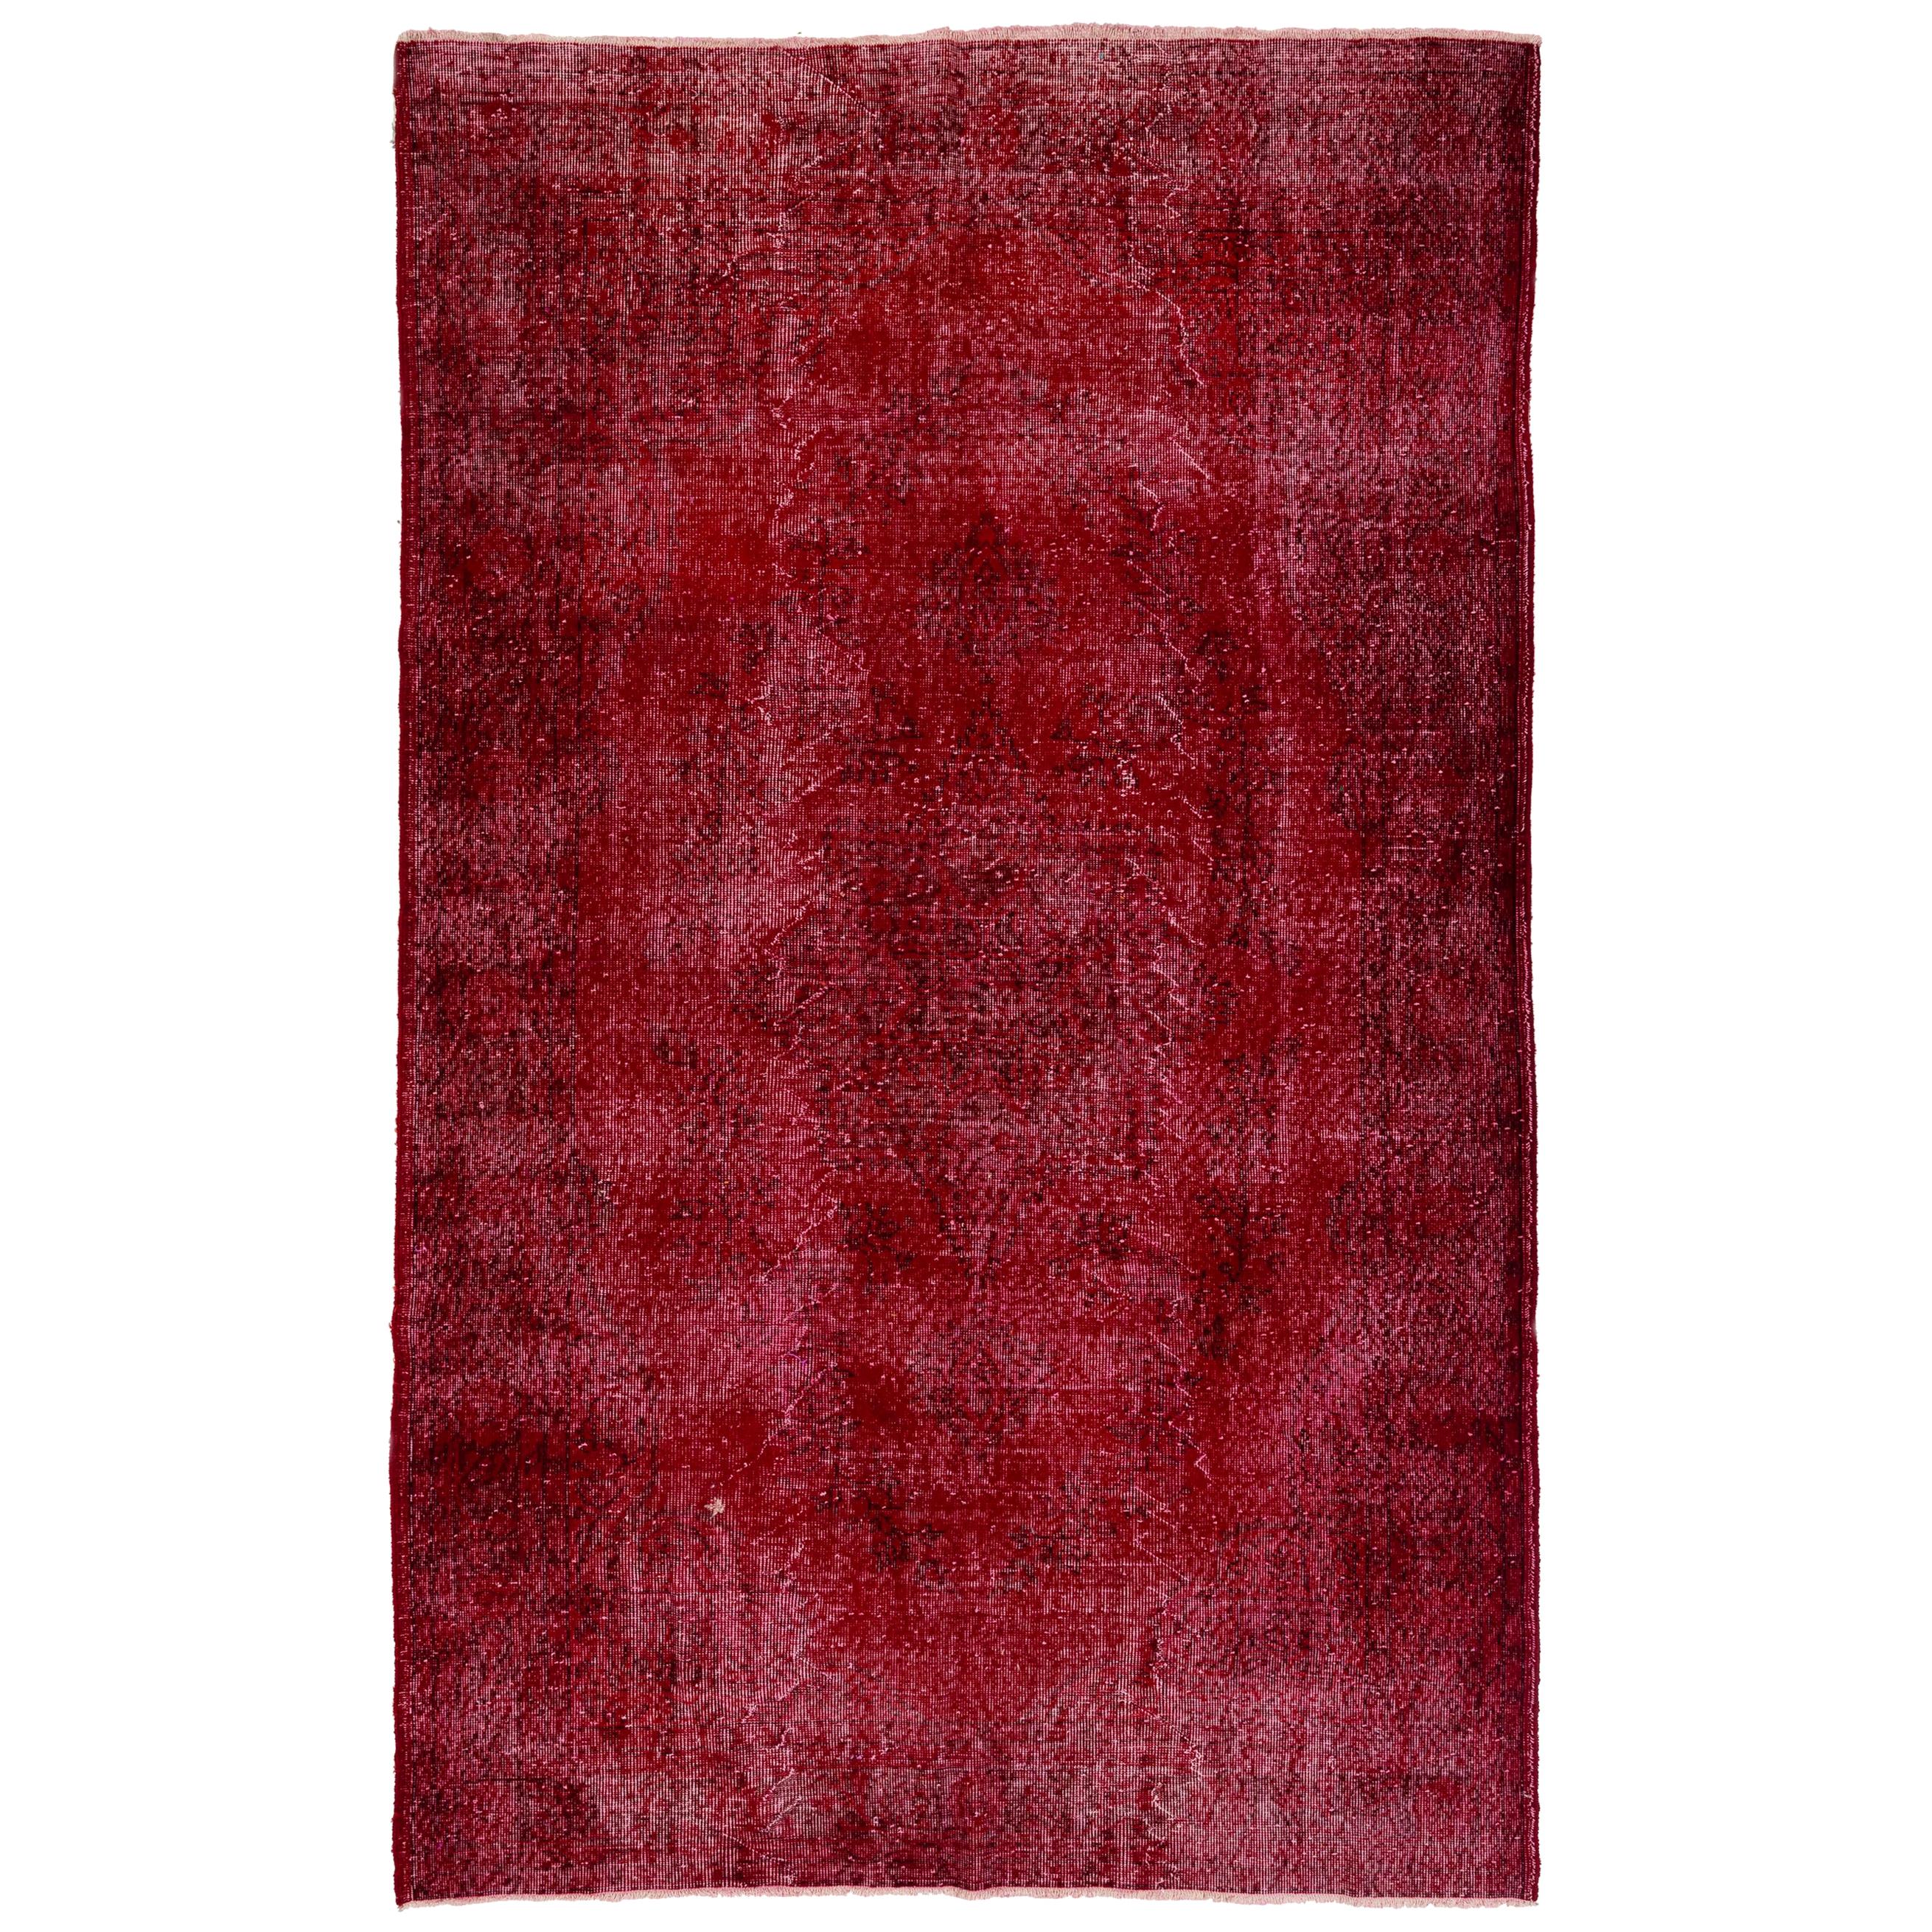 6.2x10 Ft Vintage Handmade Turkish Rug Re-Dyed in Red Color for Modern Interiors